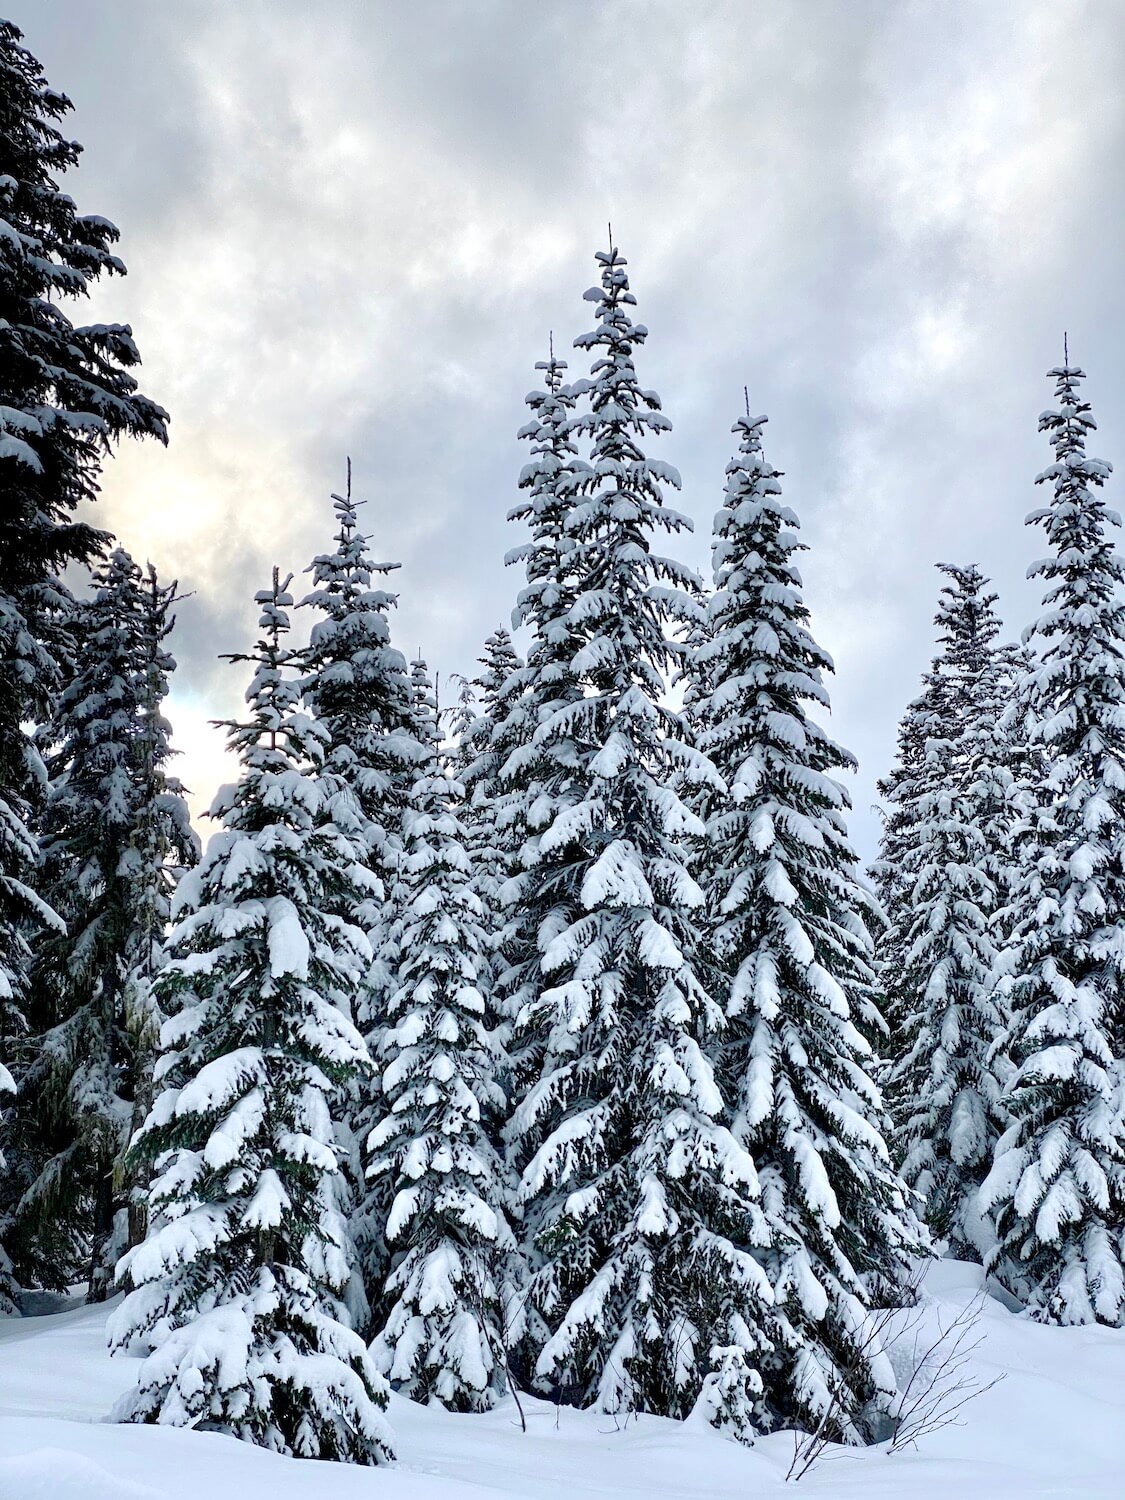 A forest of fir trees are covered with powdery snow, bending the branches down toward the ground, which is also covered with knee deep powder. 